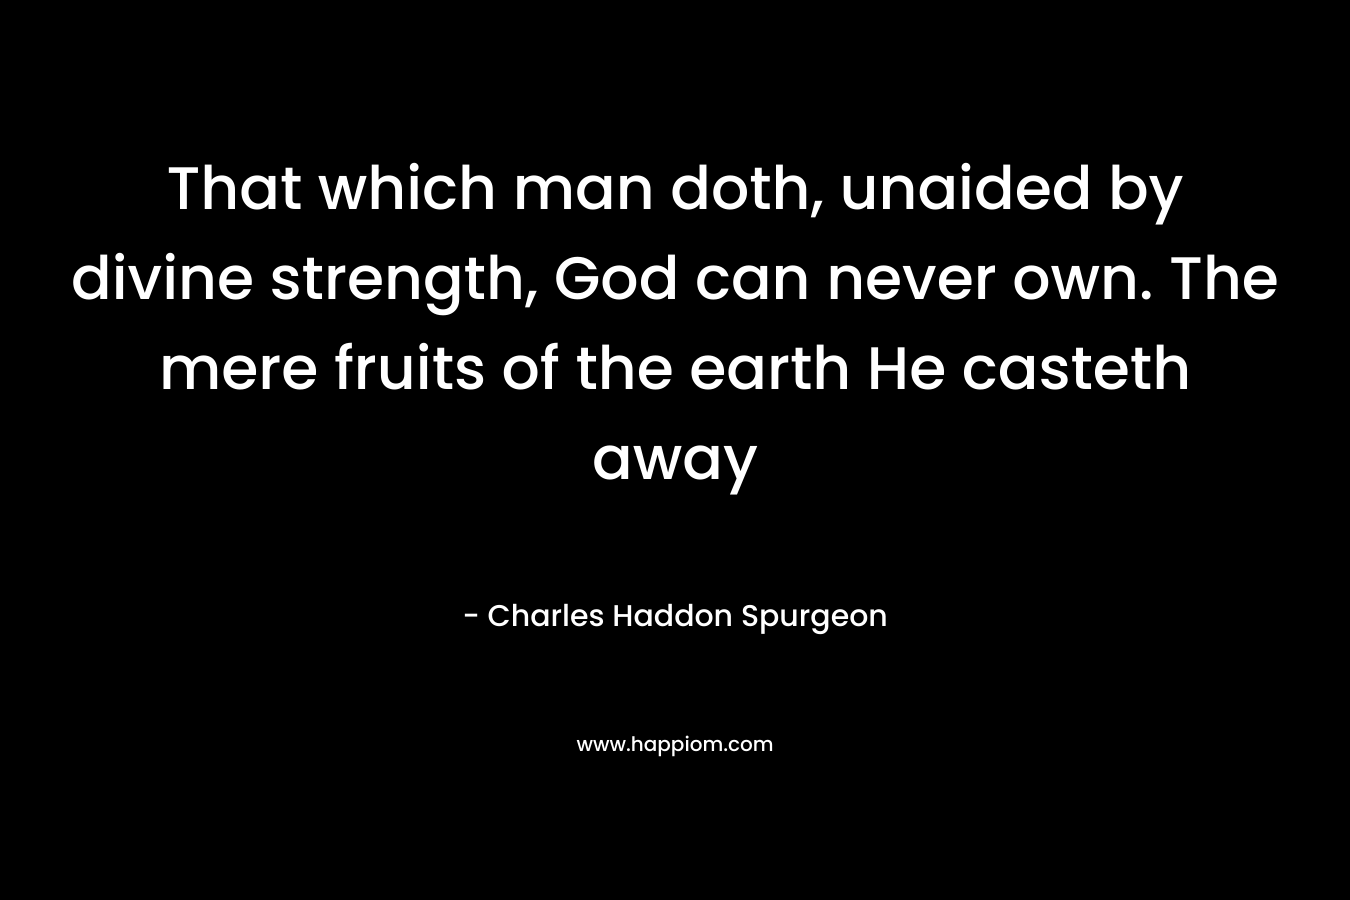 That which man doth, unaided by divine strength, God can never own. The mere fruits of the earth He casteth away – Charles Haddon Spurgeon